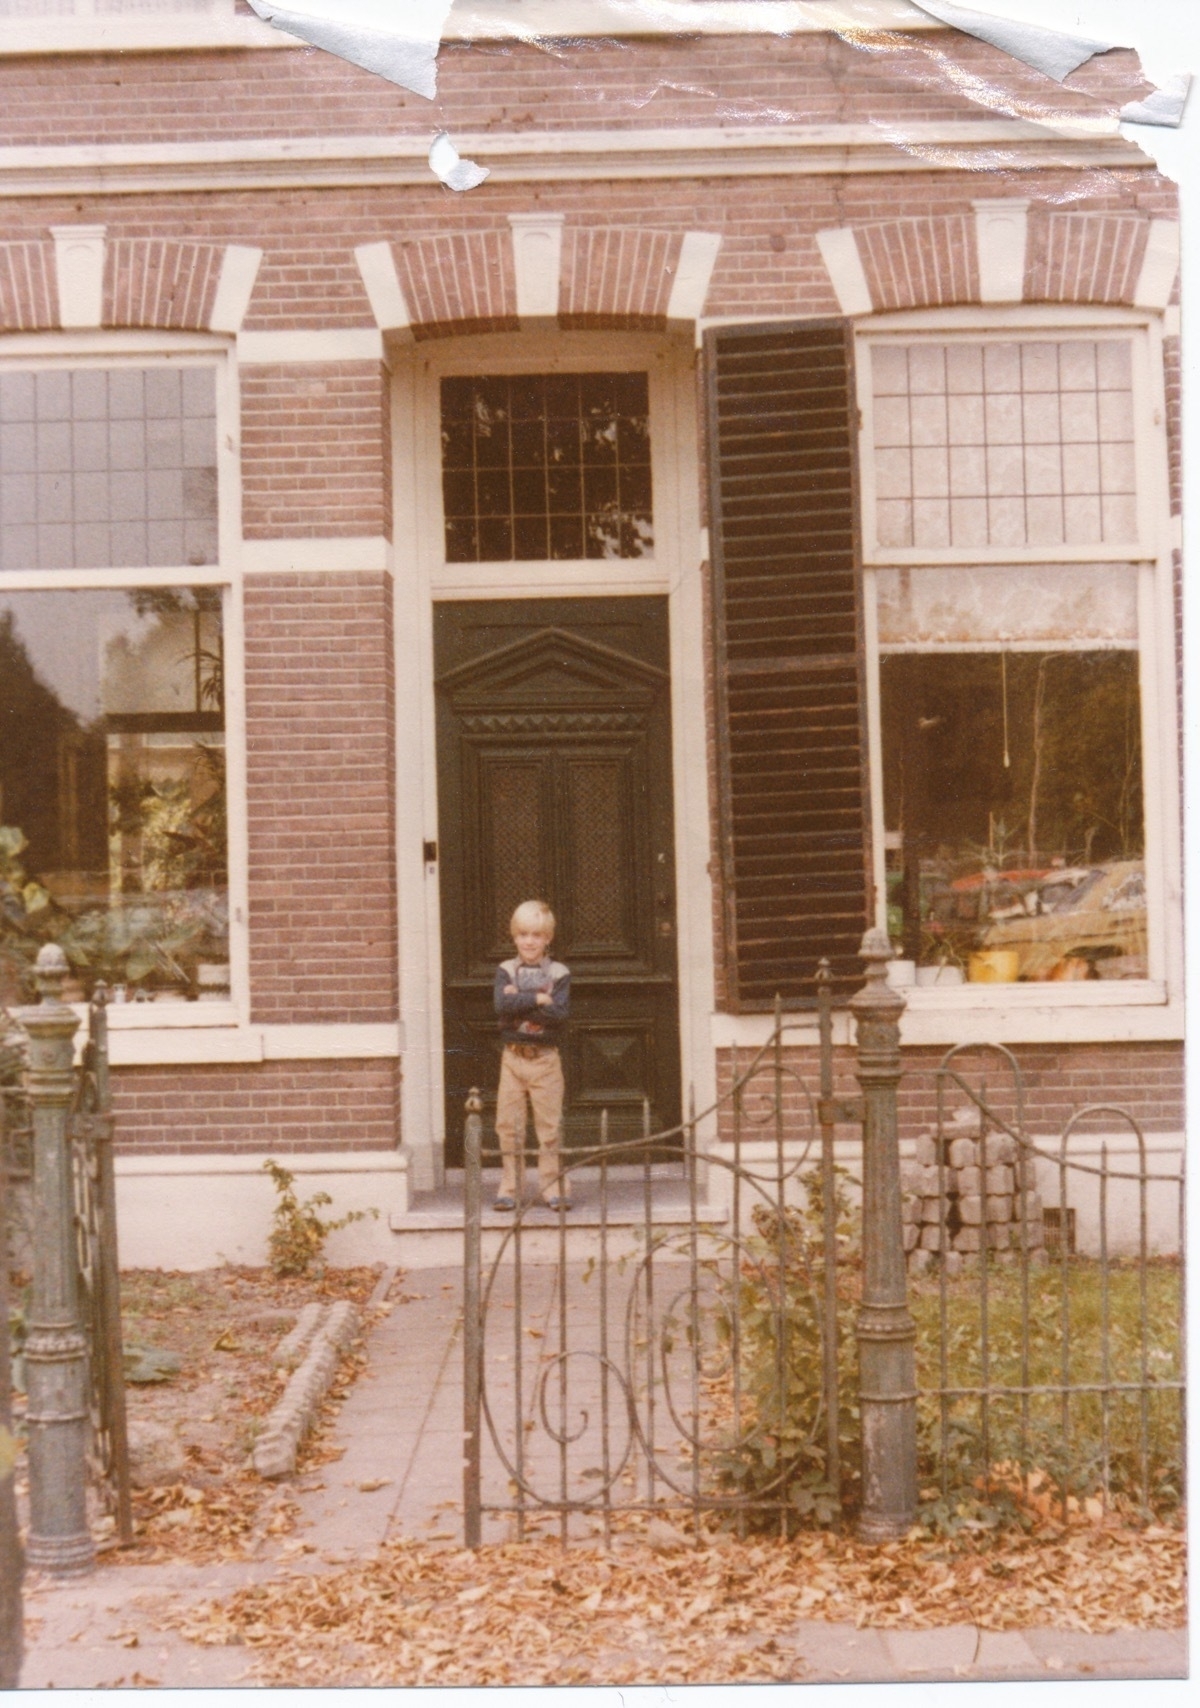 The front of a brick house in the Netherlands in 1977 with me, aged 7, standing at the front door